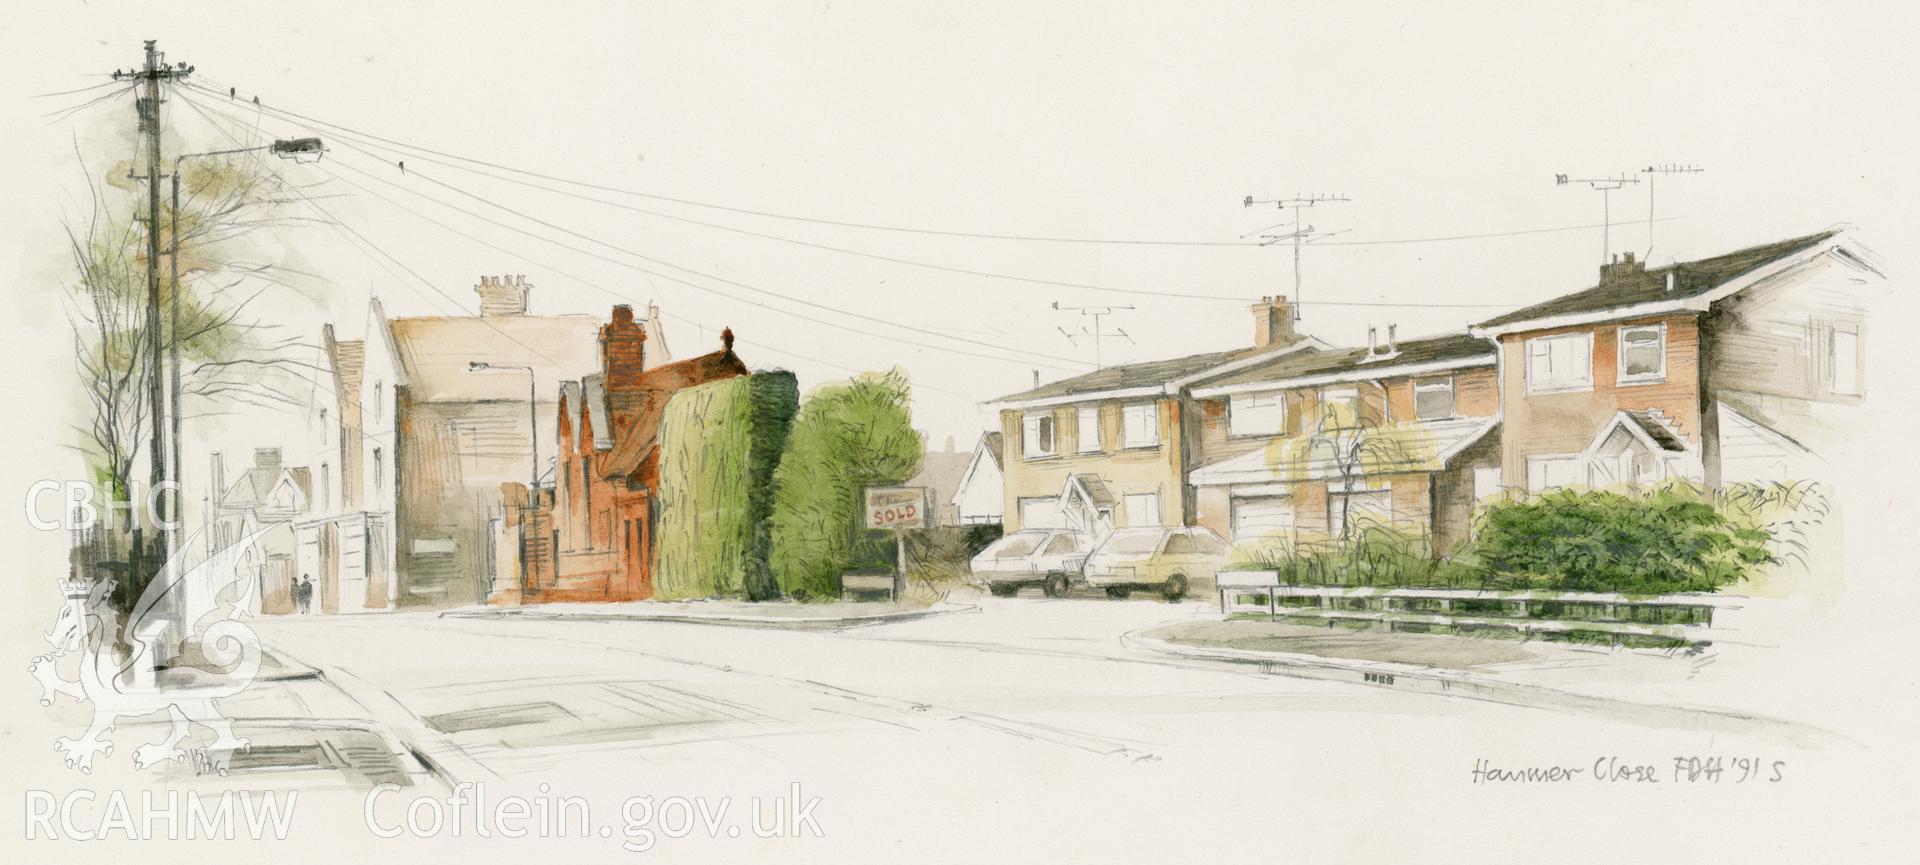 Overton-on-Dee: (pencil and watercolour) drawing, Hammer Close with High Hedge.